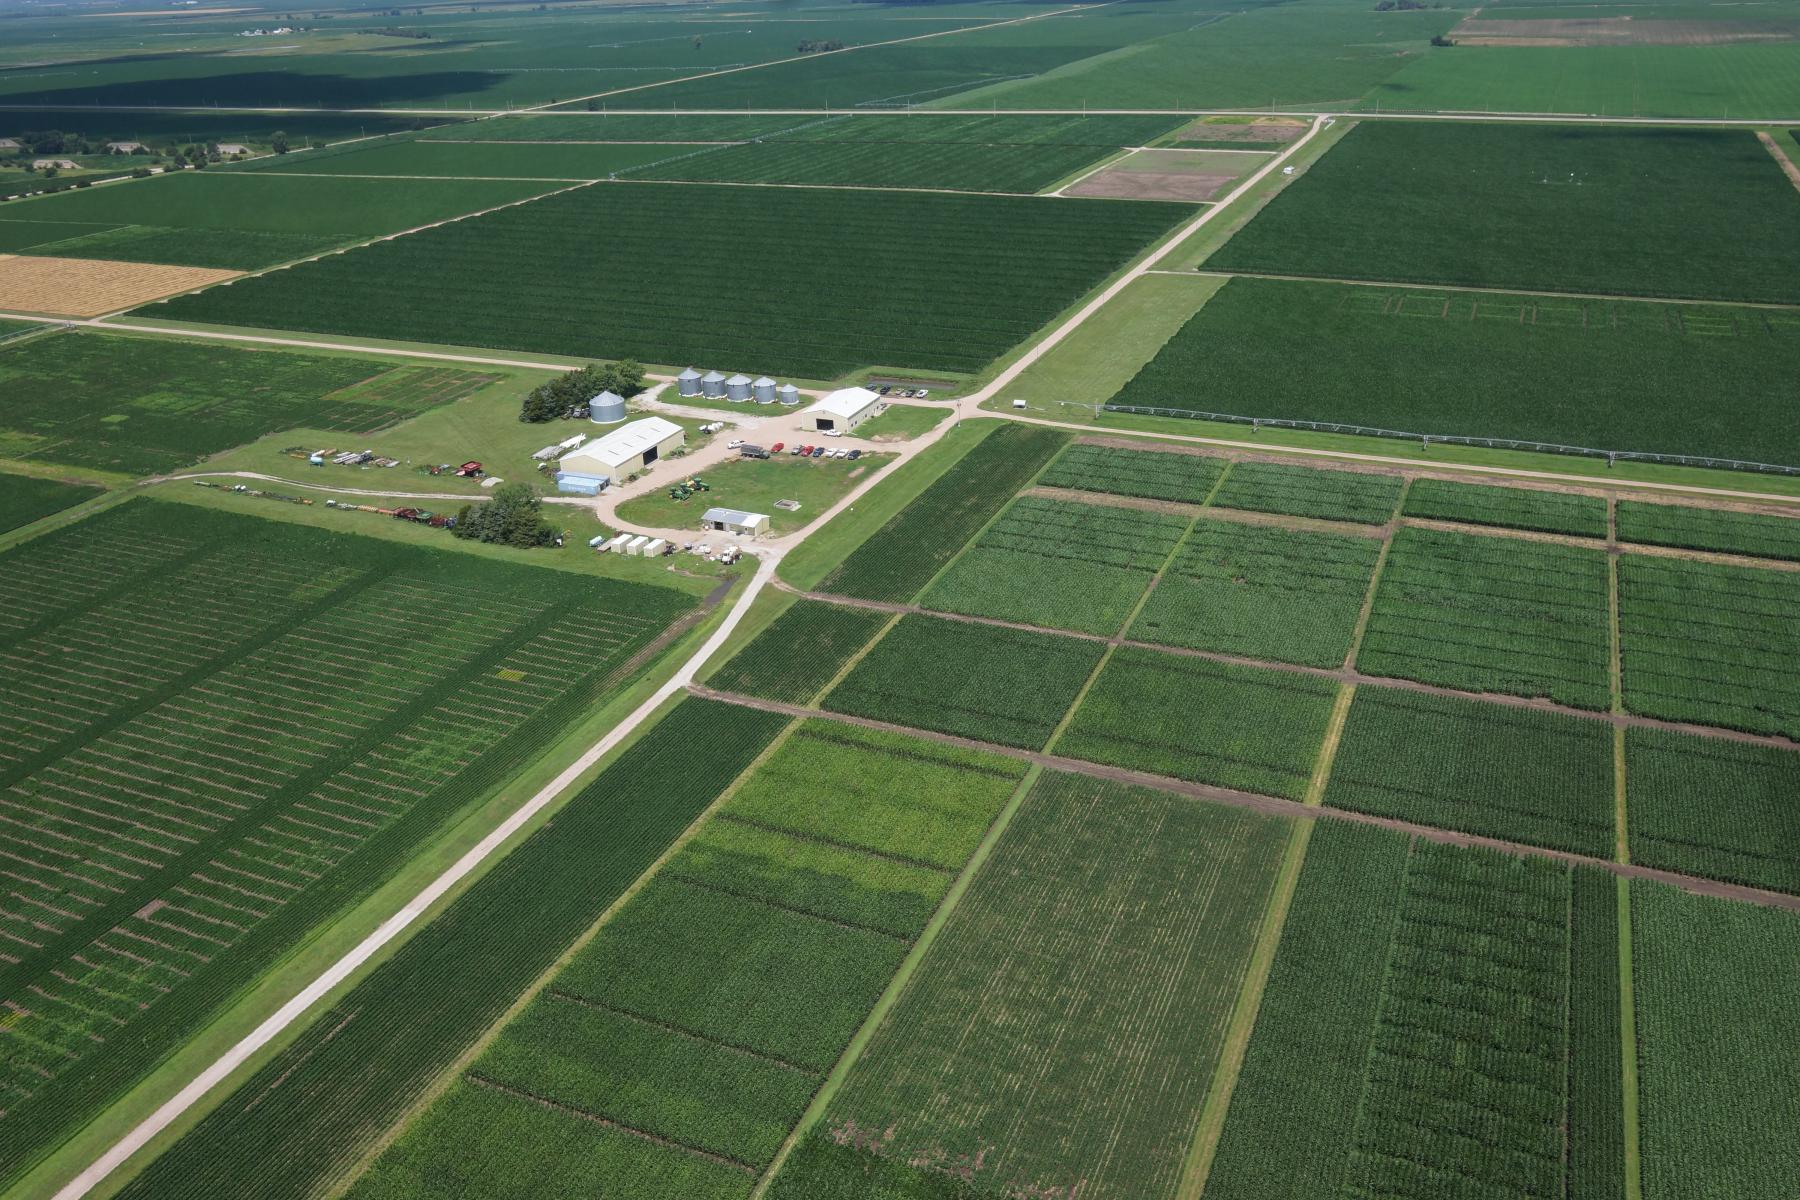 Soil fertility, weed management and crop variety research trials. SCAL research facilities are located near the center of the photograph.